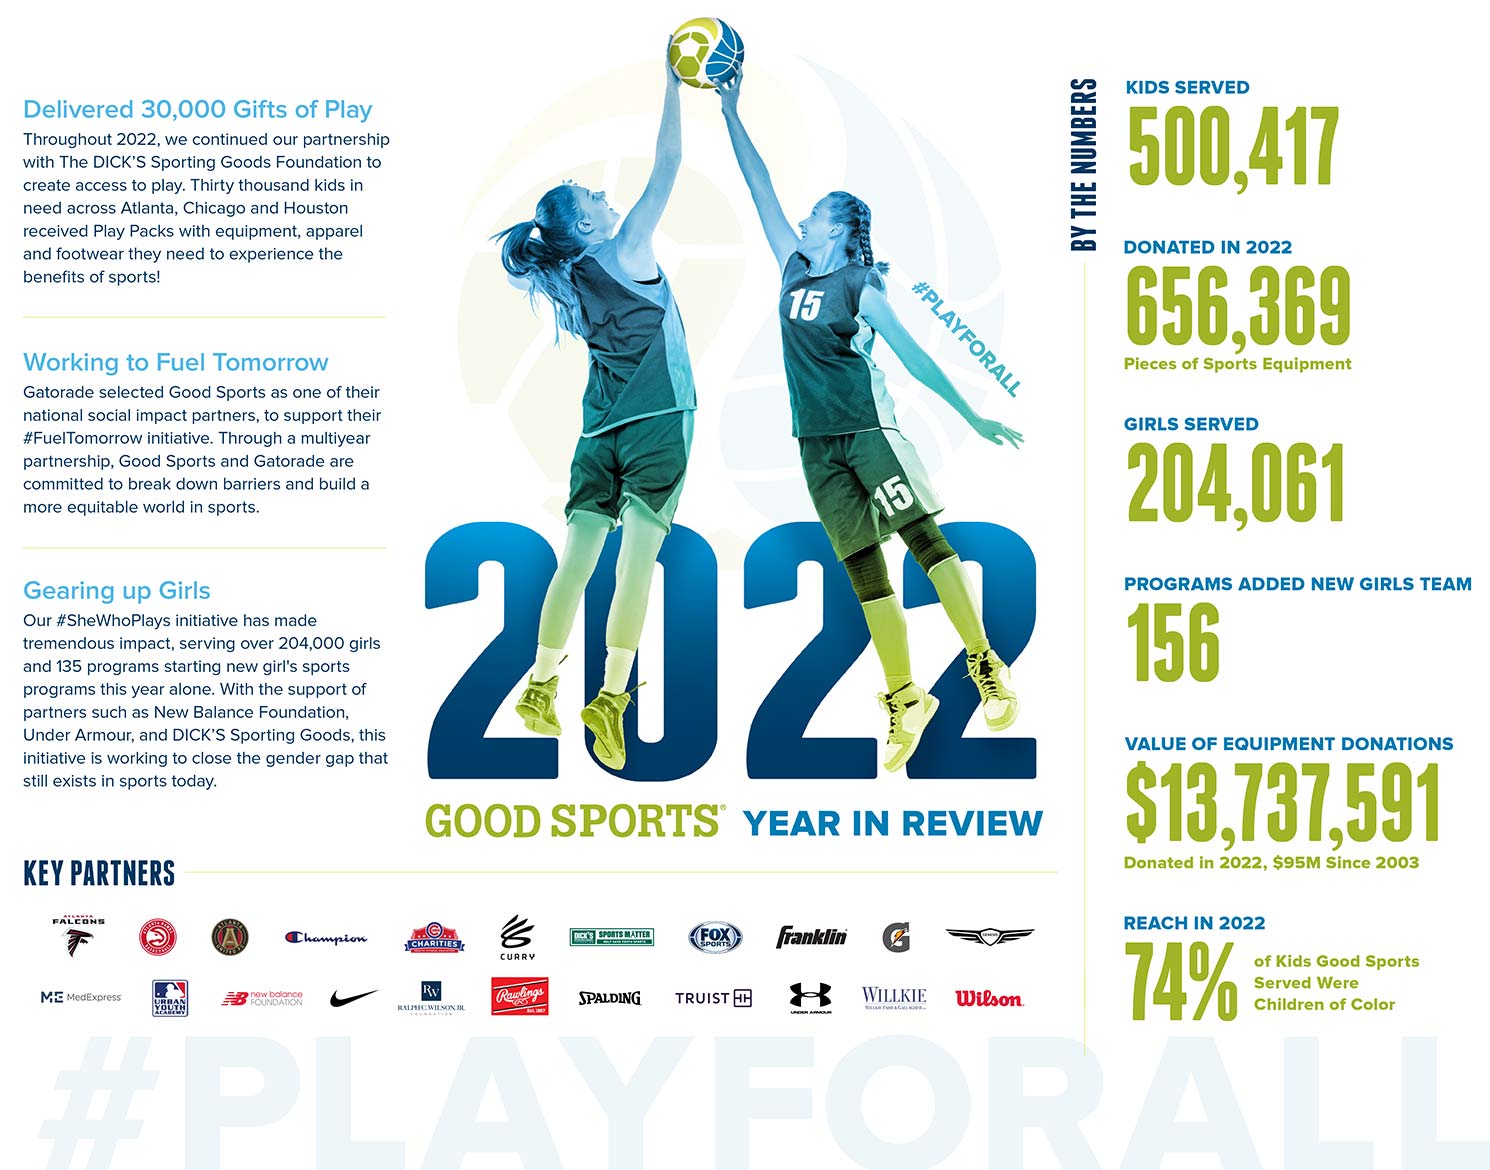 Good Sports Year in Review infographic design